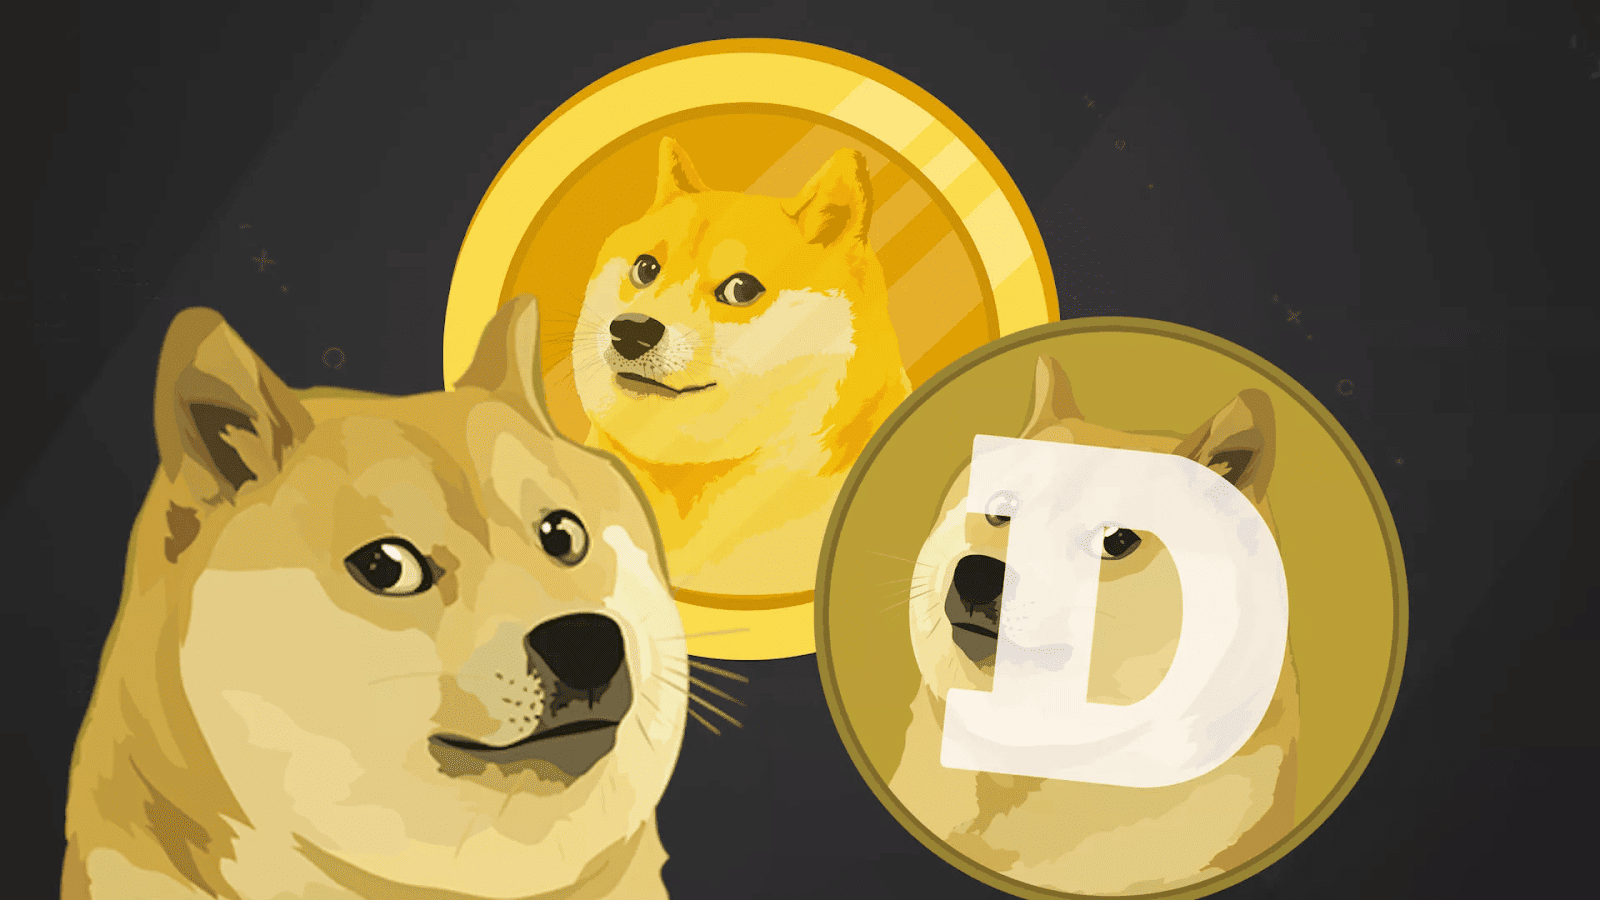 Dogedao.vip Registration, Sign Up, Login, Account (Make Money on Dogedao.vip Investment)